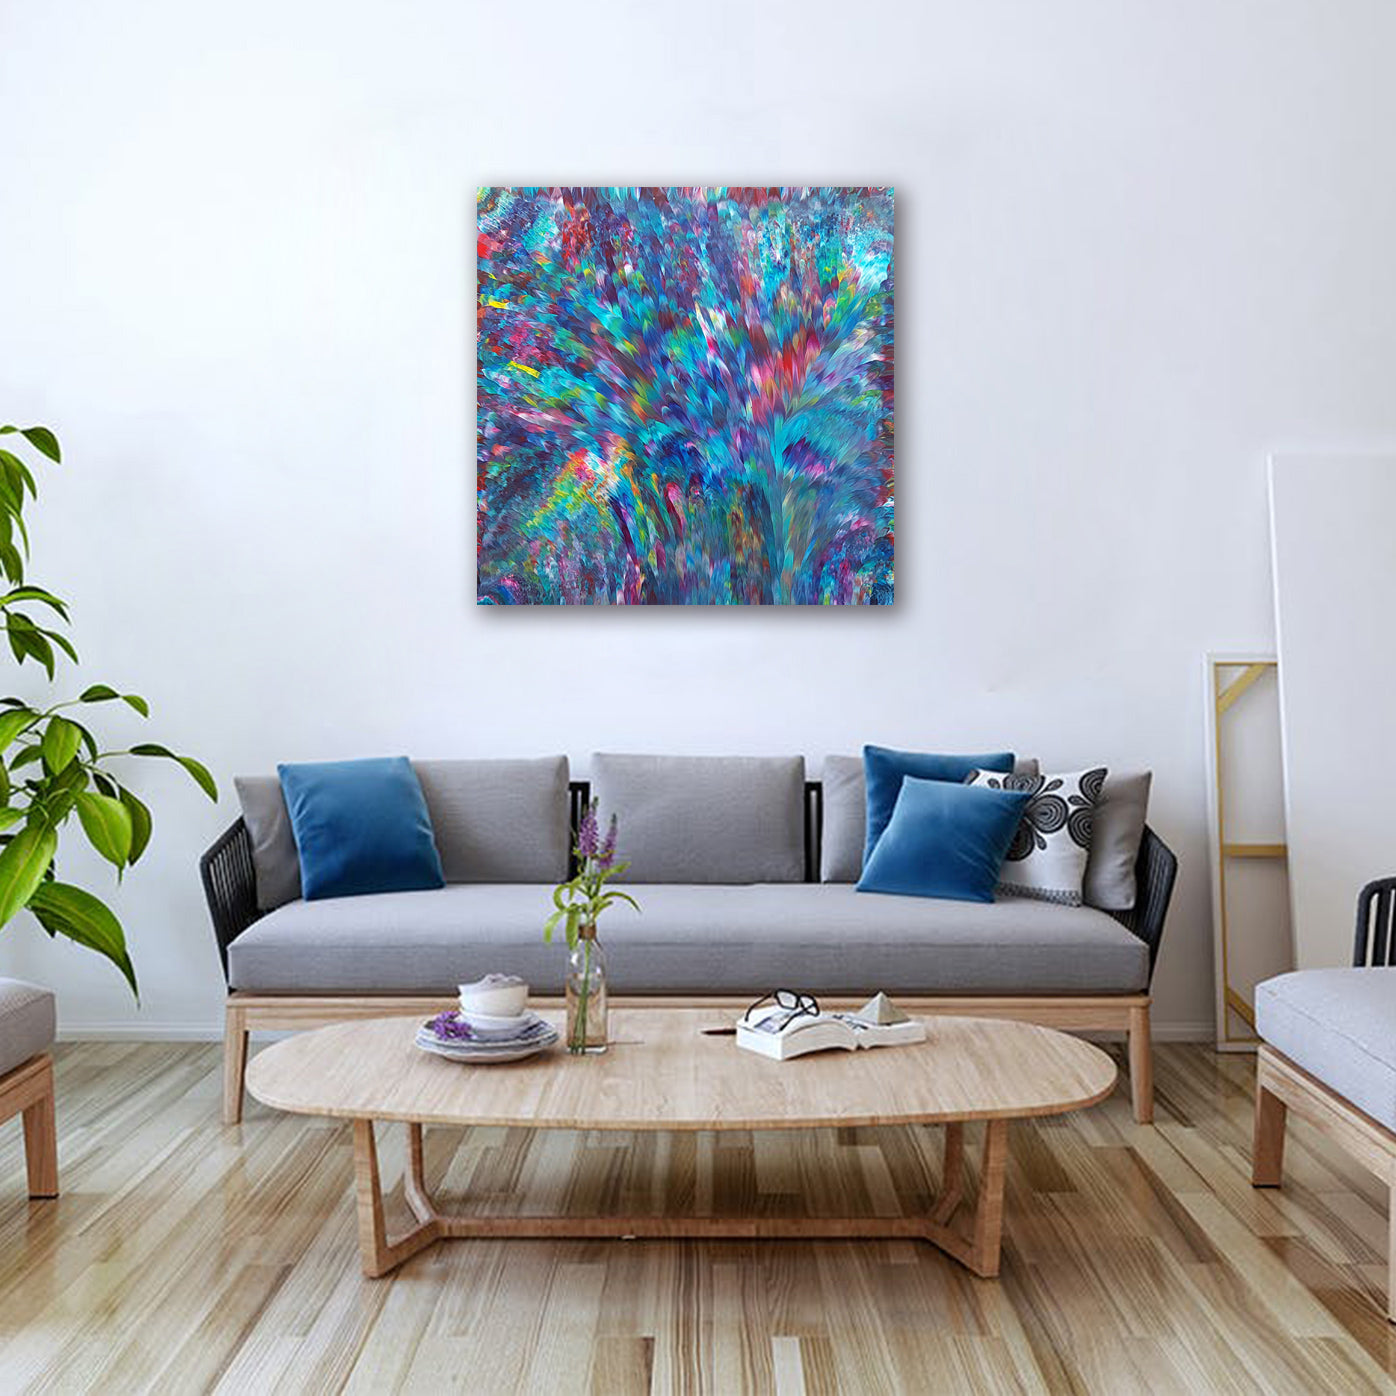 Psychedelic-Waterfall-No.-3-by-Alexandra-Romano-Art-Original-One-of-a-Kind-Abstract-Expressionism-Paintings-Buy-Affordable-Artwork-Online-Modern Home Decor